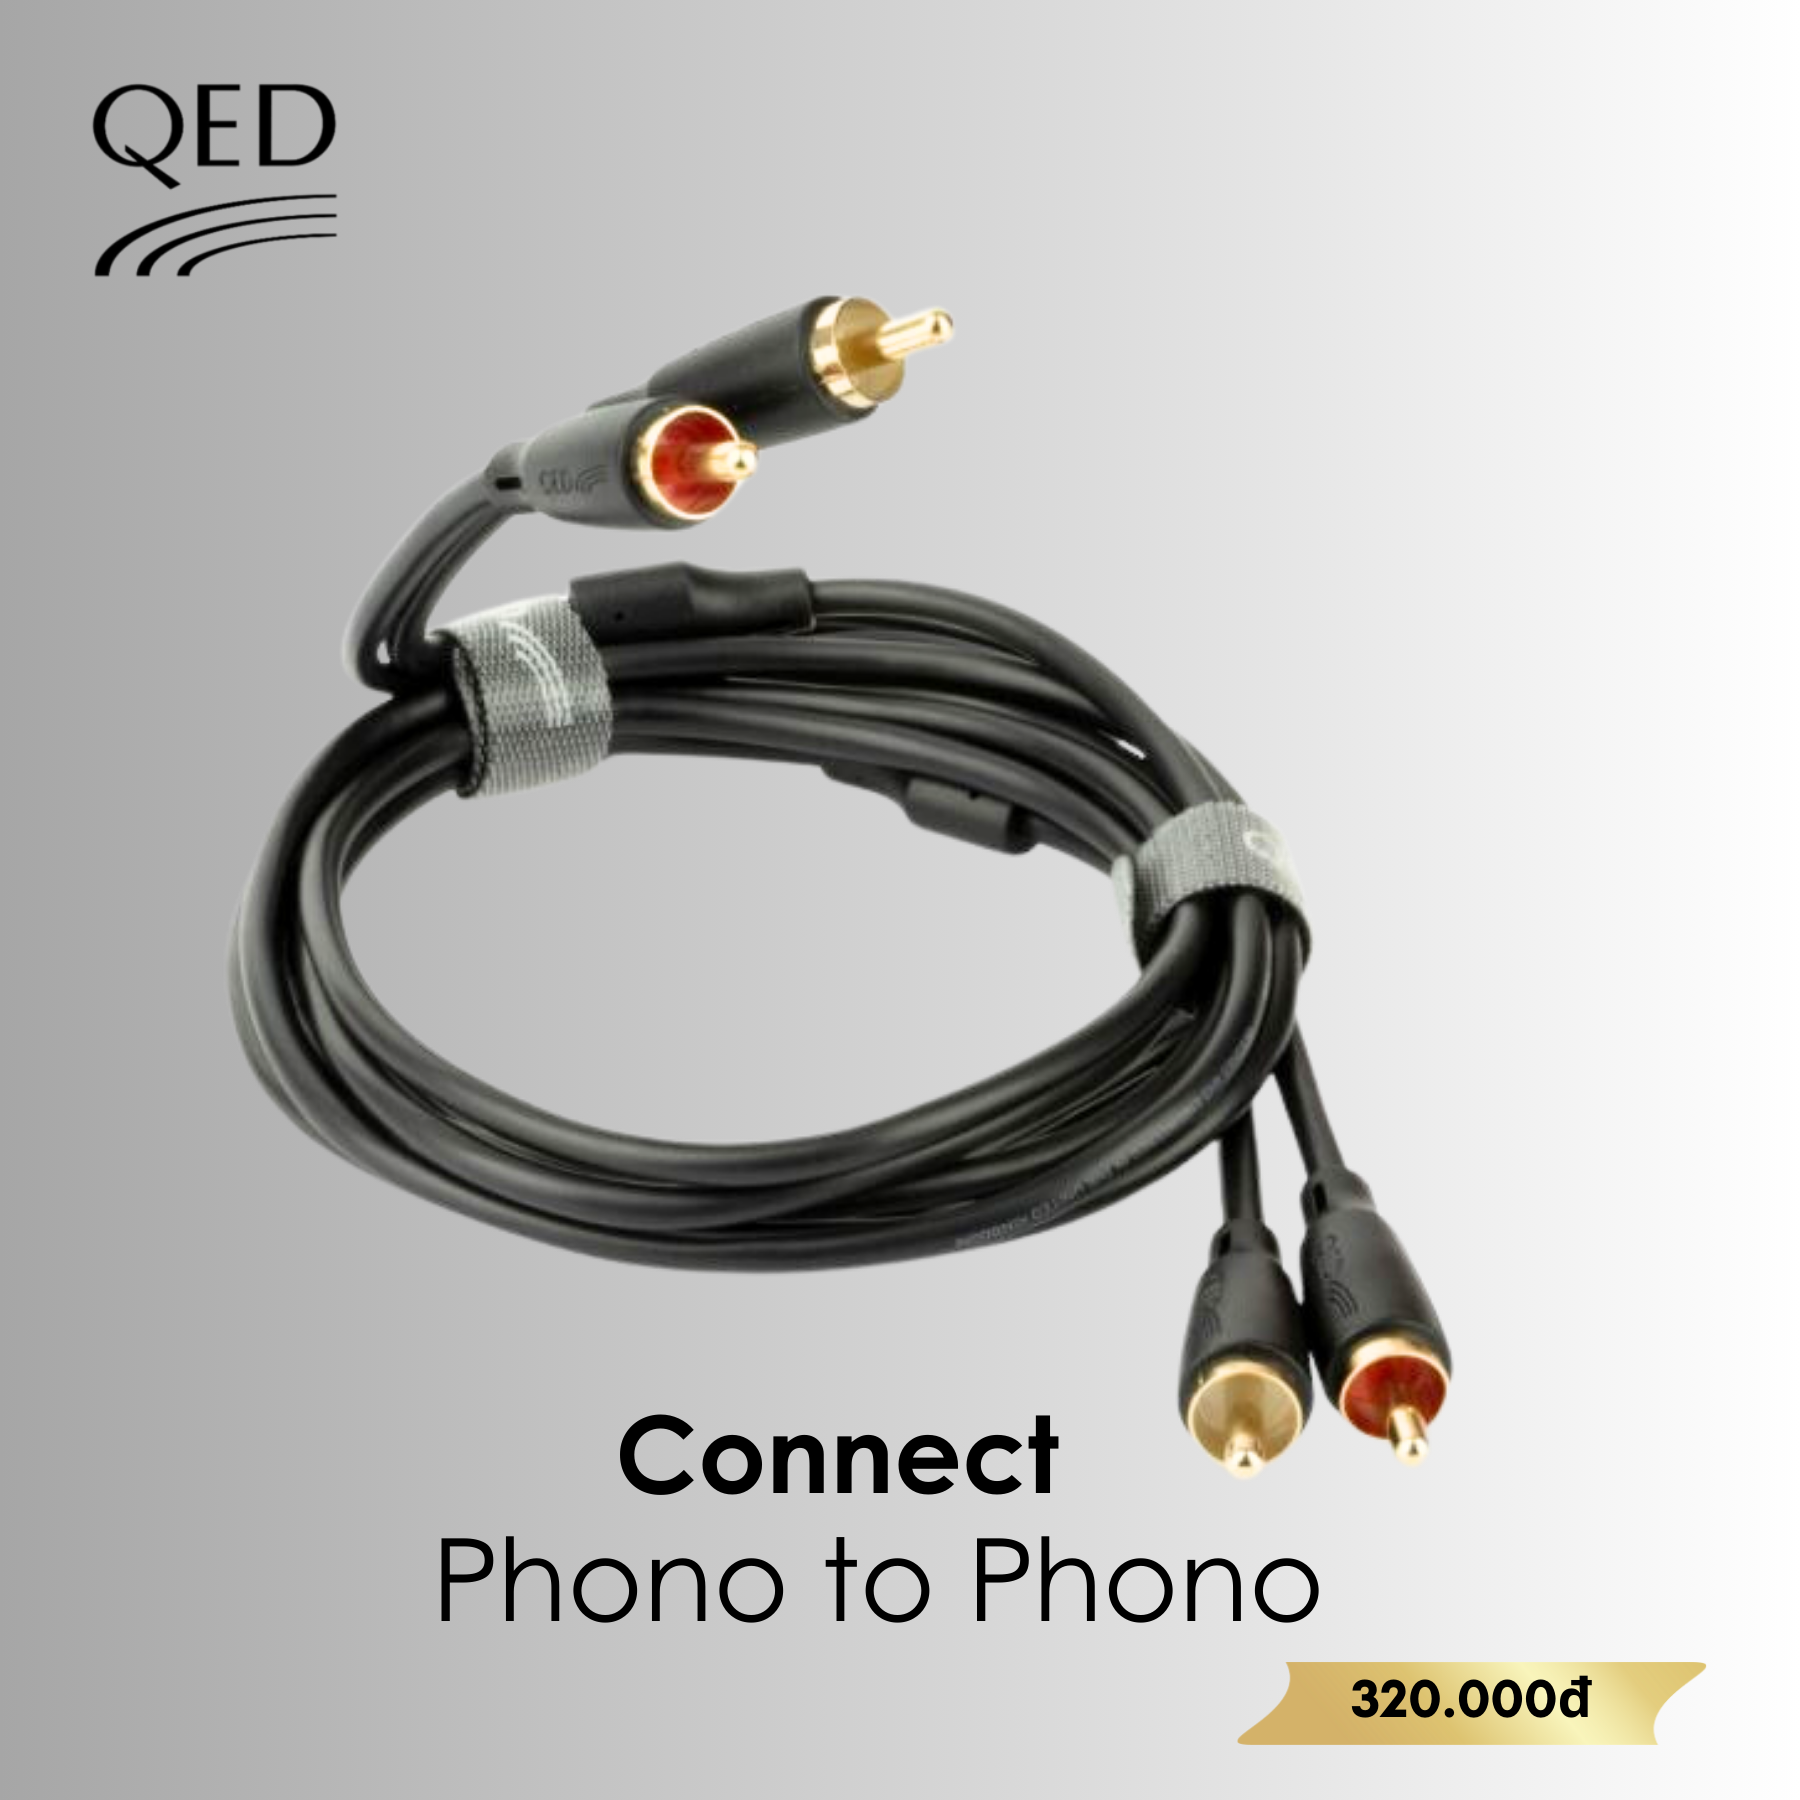 Connect Phono to Phono Cable